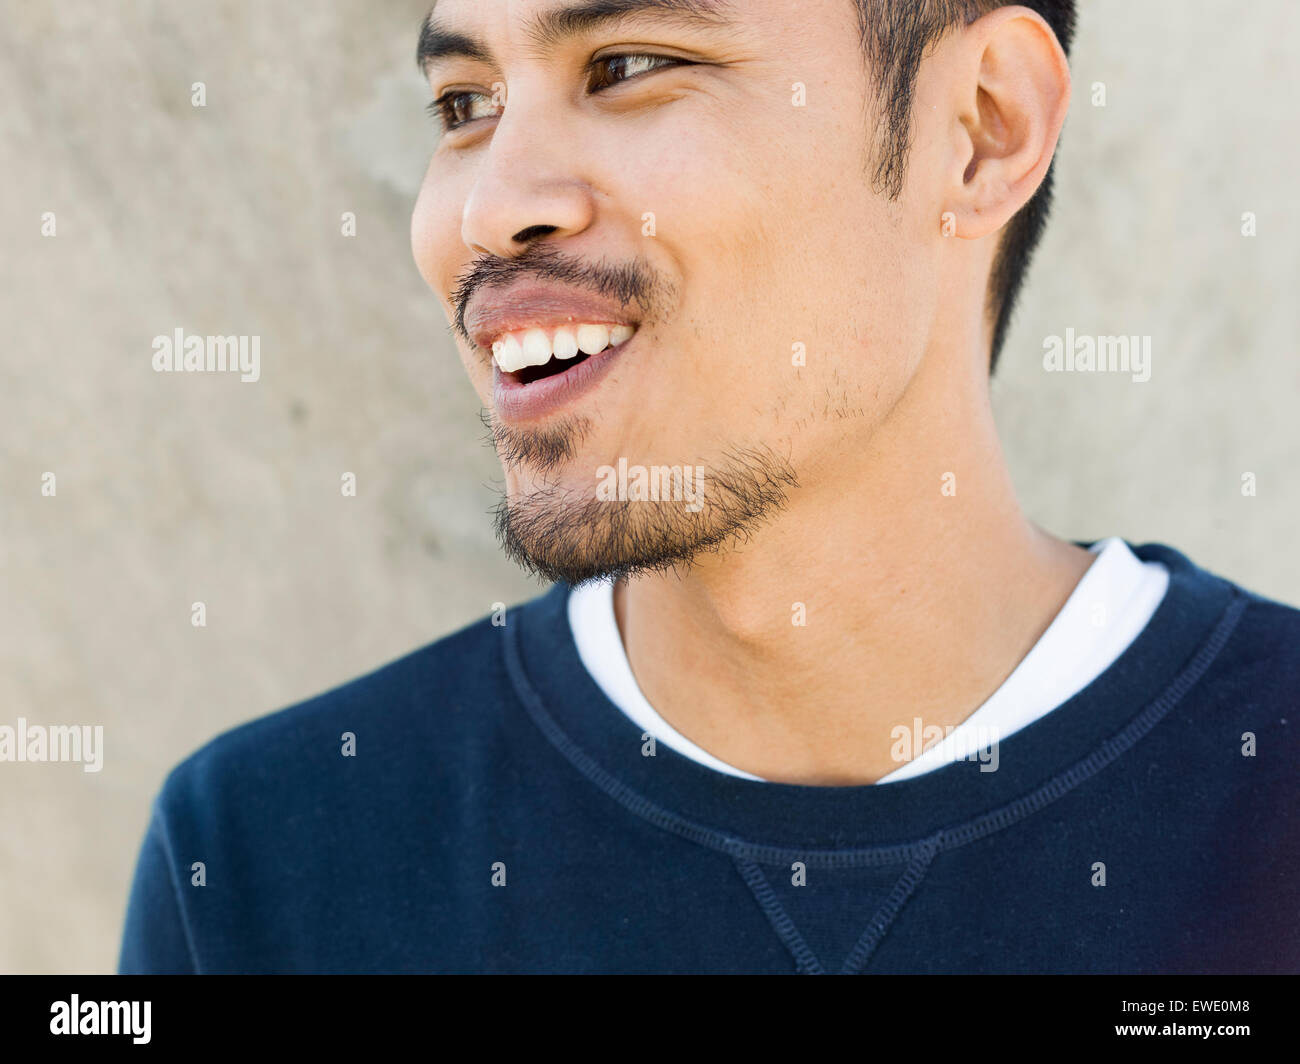 Portrait of a smiling young man Asian mixed race stubble beard looking sideways Stock Photo